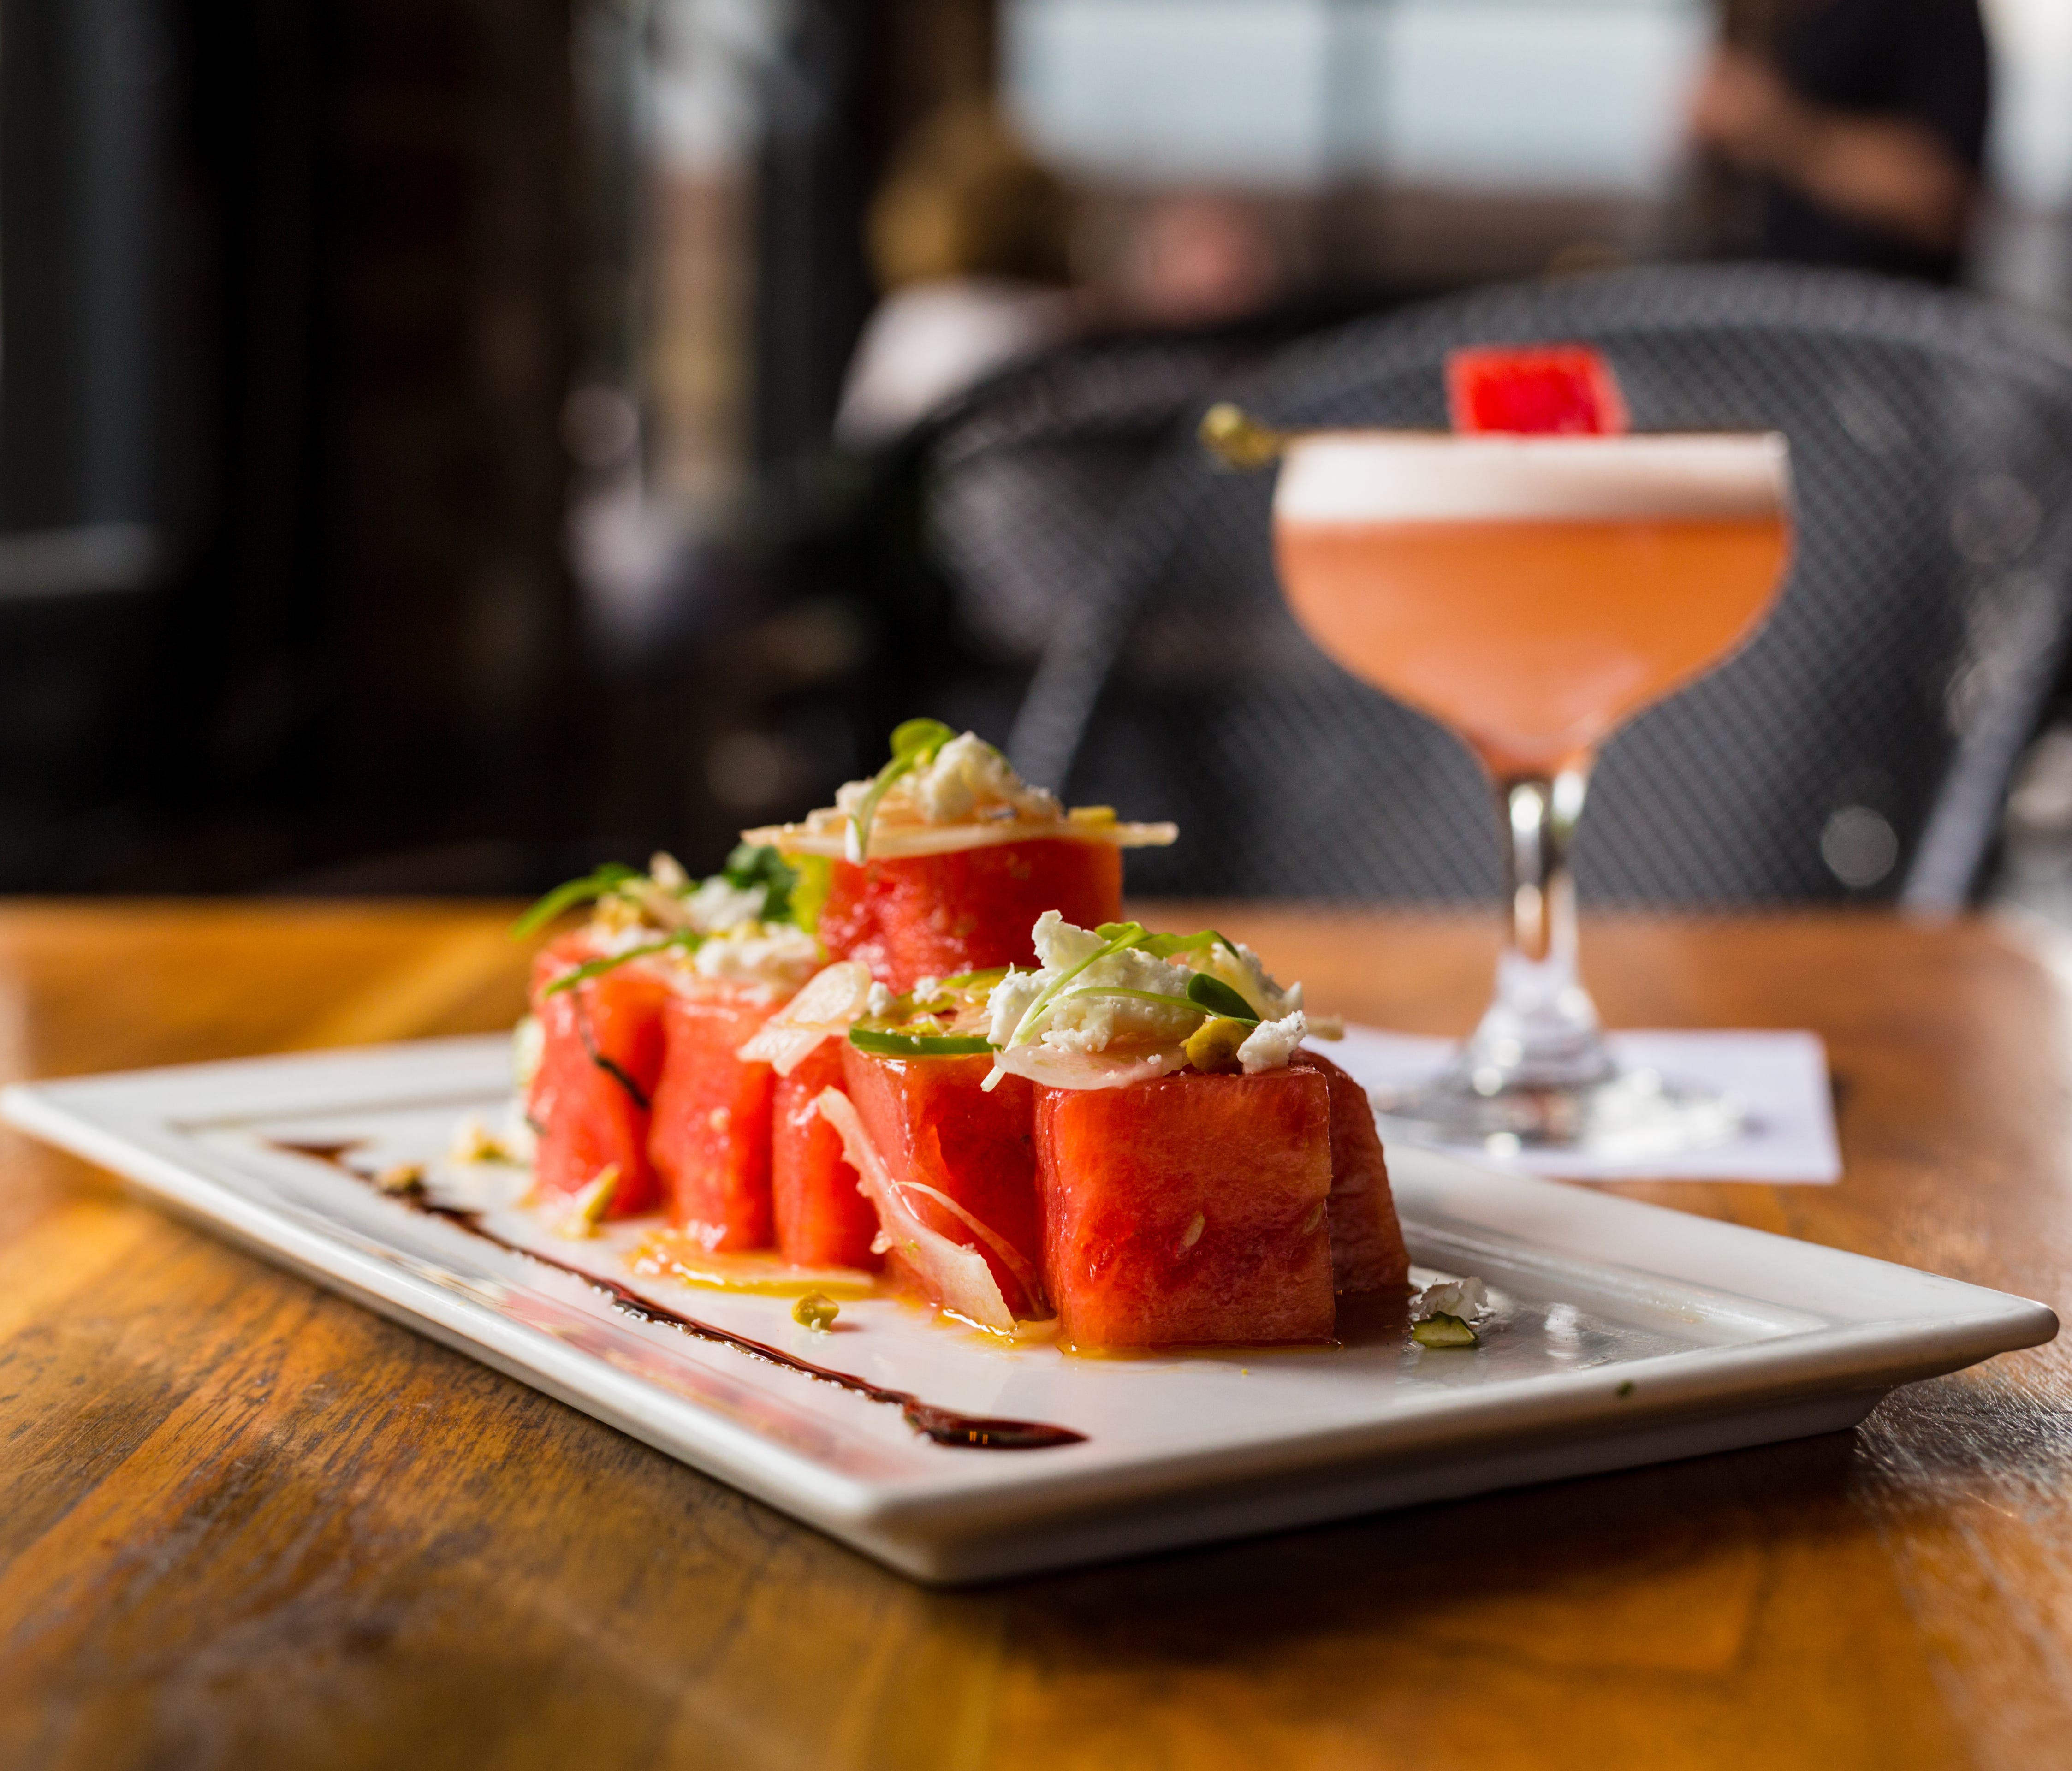 In Columbia, South Carolina, Motor Supply Co. Bistro offers the Bradford Watermelon Salad with pistachios, Trail Ridge Farms Feta, shaved jalapeno, fennel, Pernod syrup, pomegranate molasses and City Roots Microgreens. Pair with a Watermelon Sour, wh